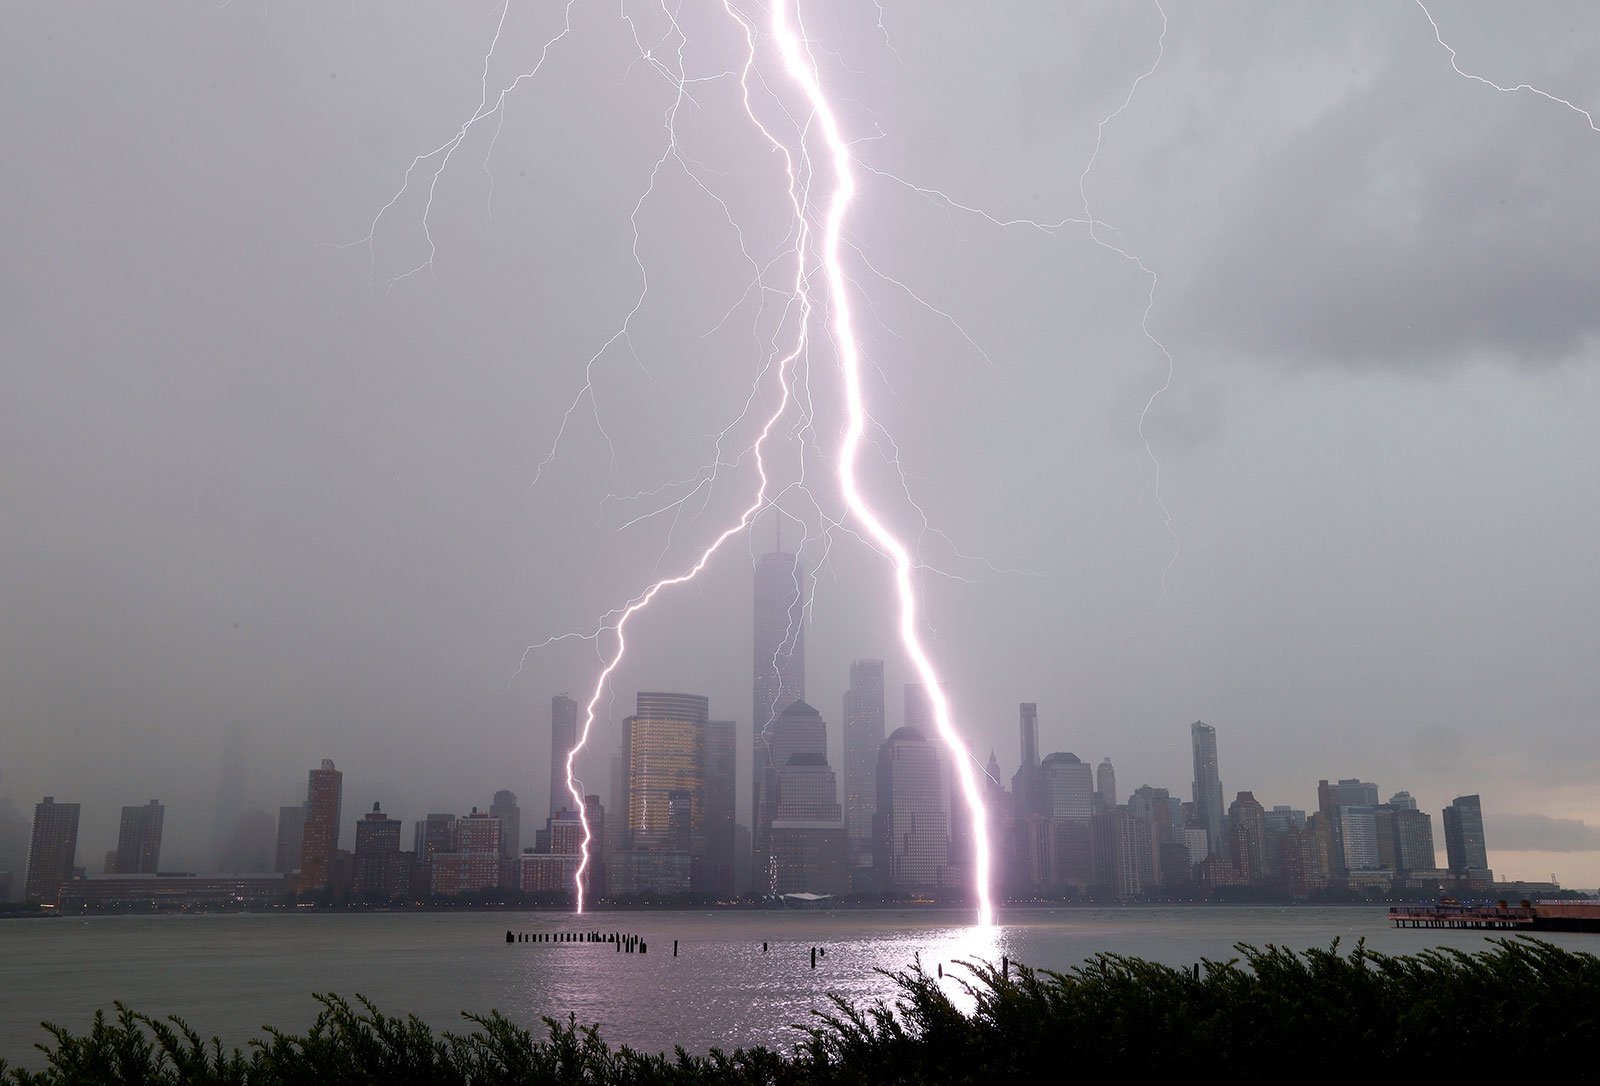 NYC thunderstorm with skyline in background 